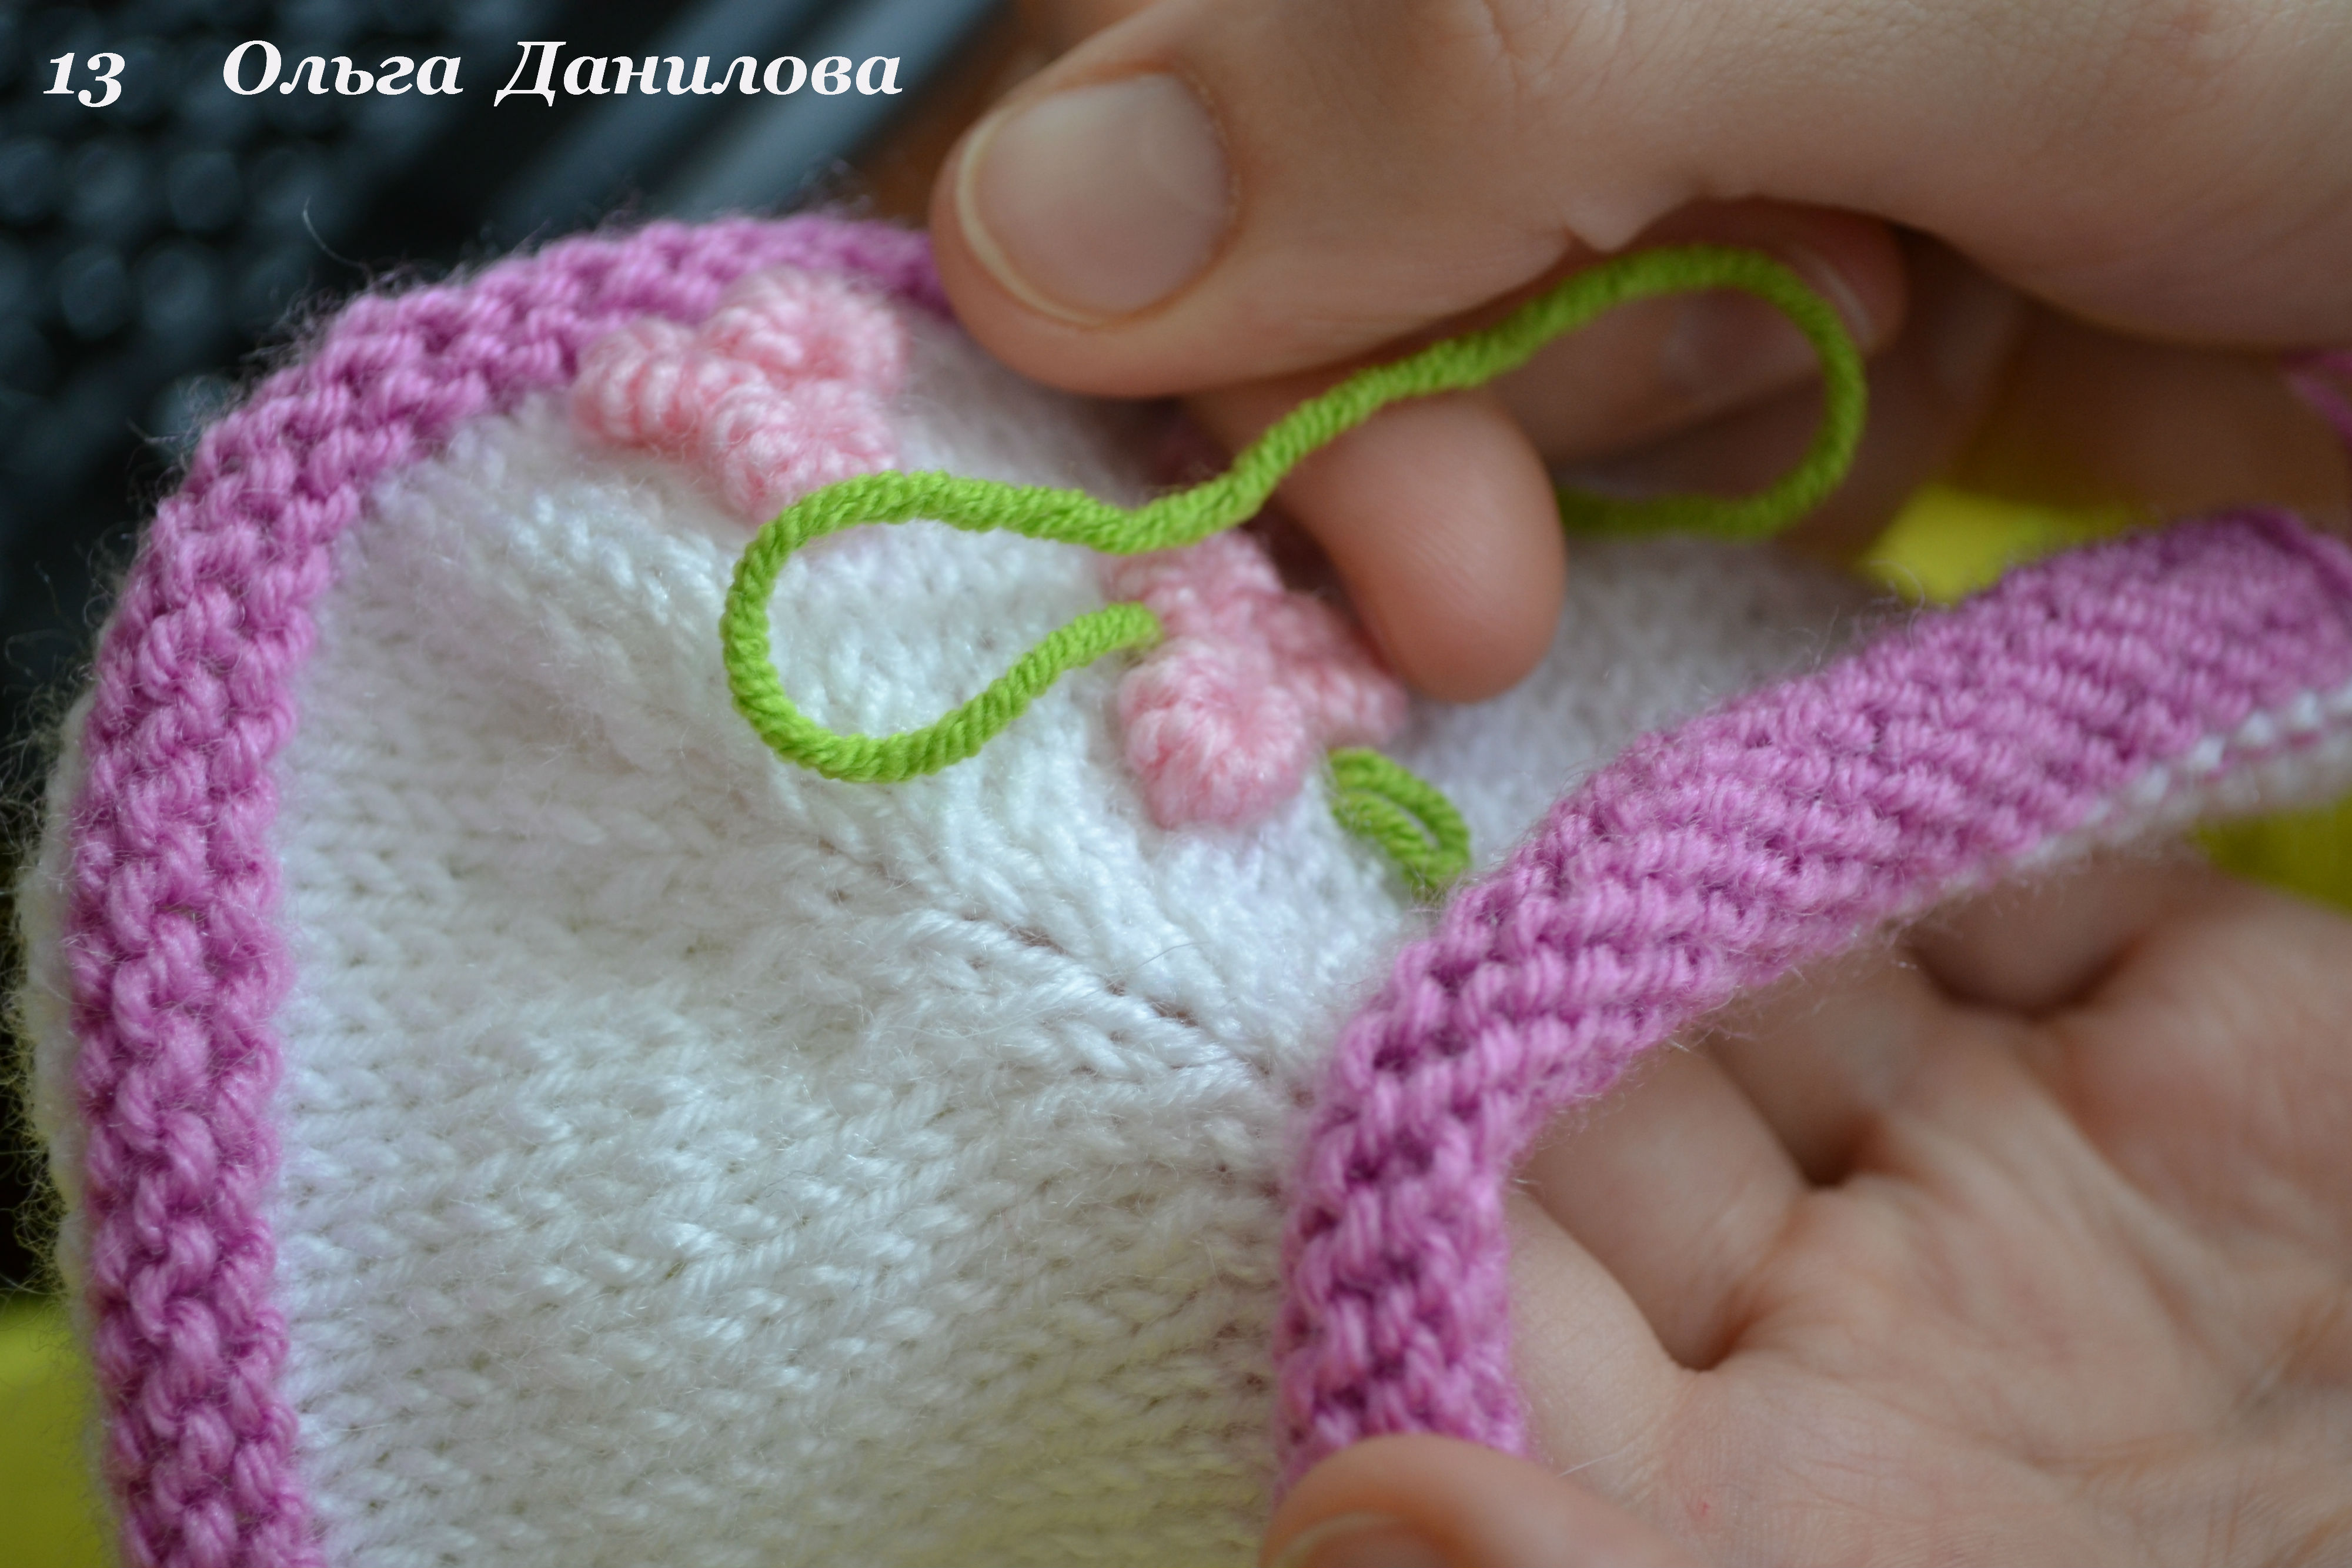 How-to-Make-Pretty-Knitted-Baby-Booties-15.jpg